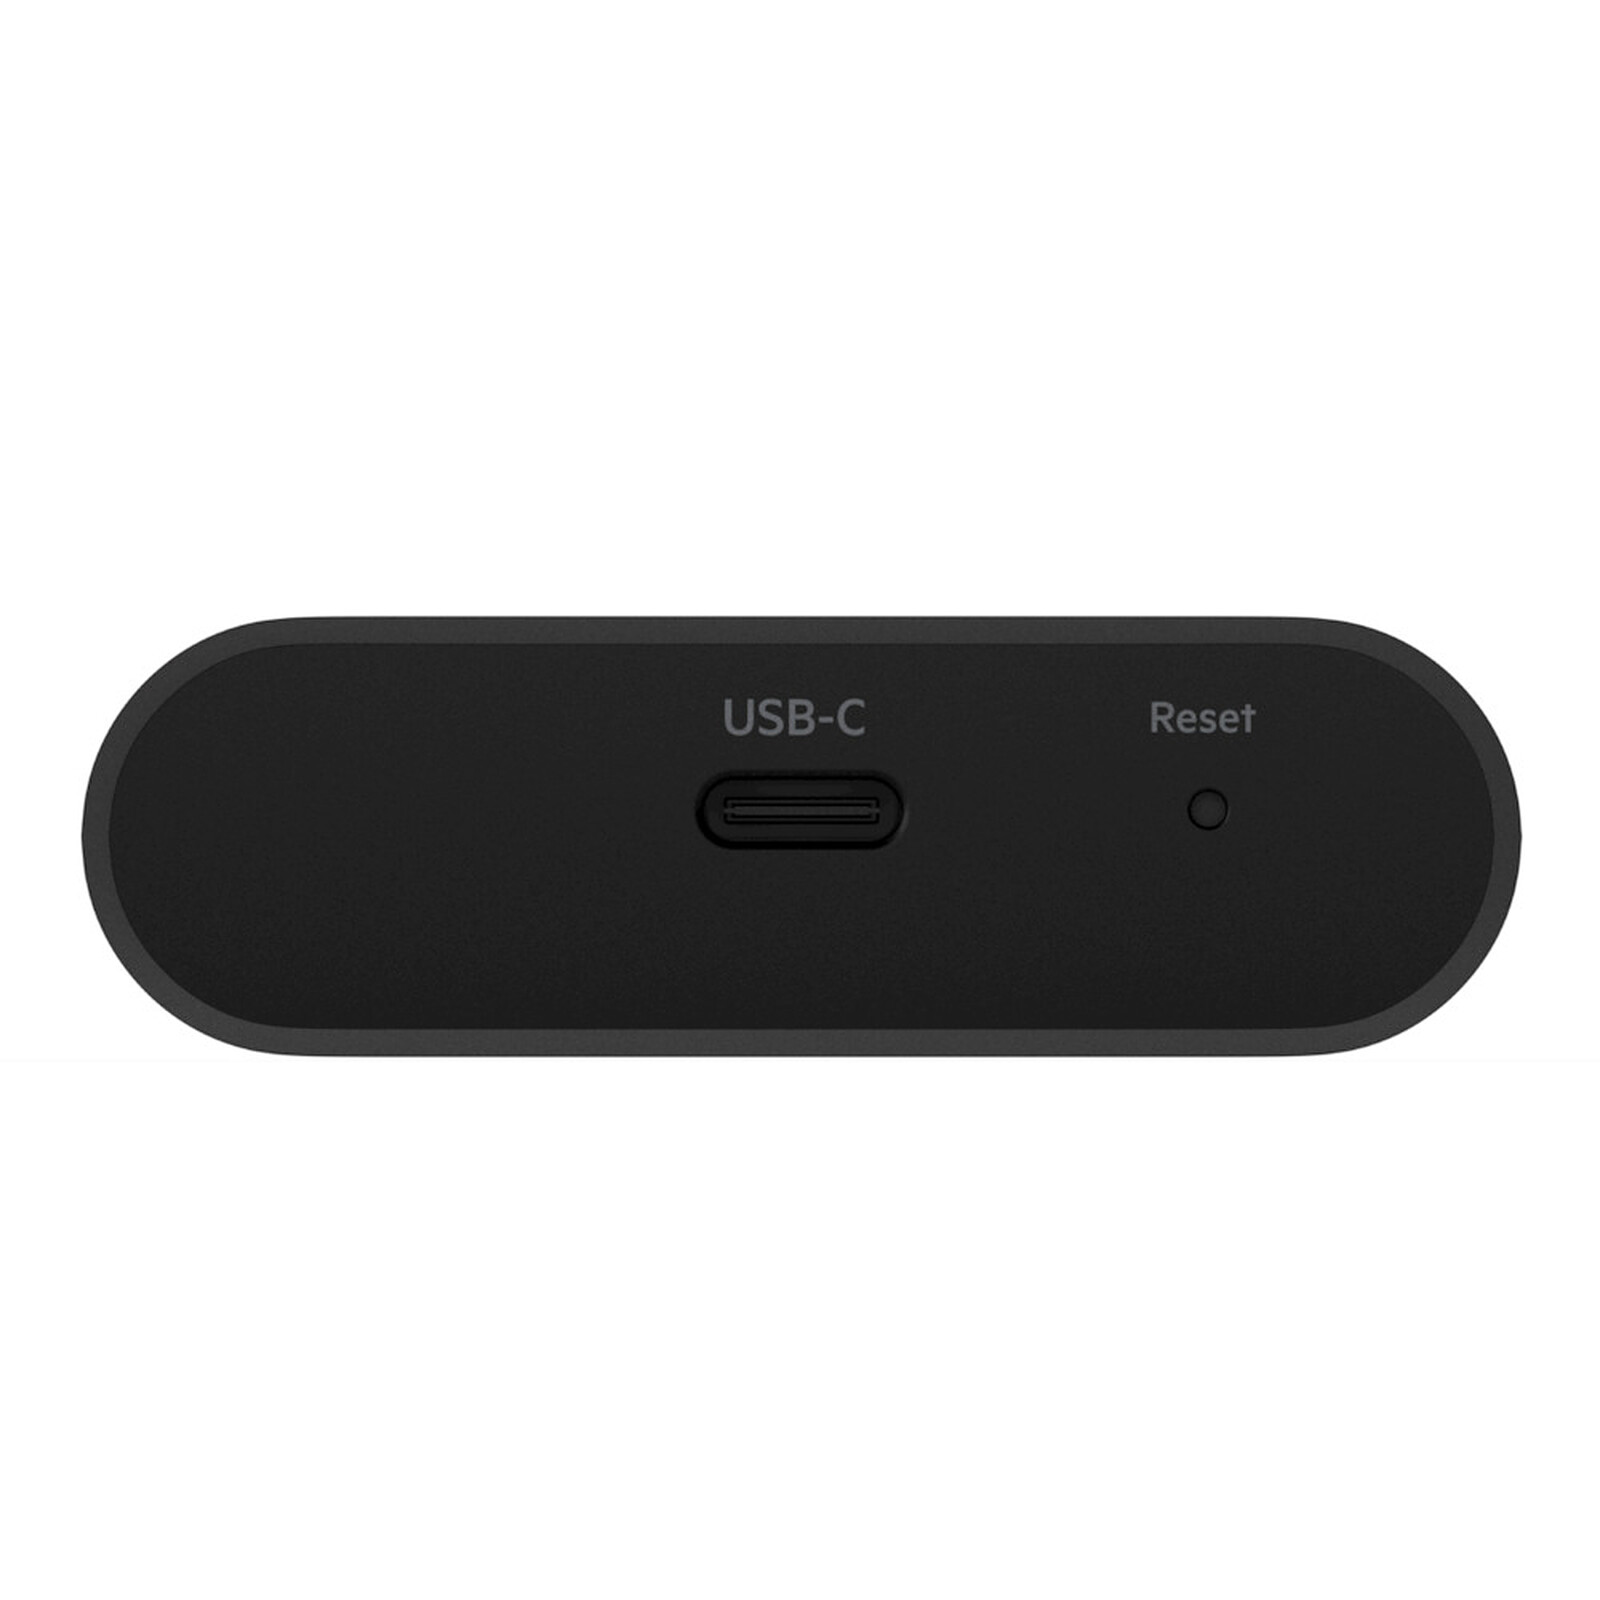 Belkin Soundform Connect Stereo to Airplay2 Converter - Network